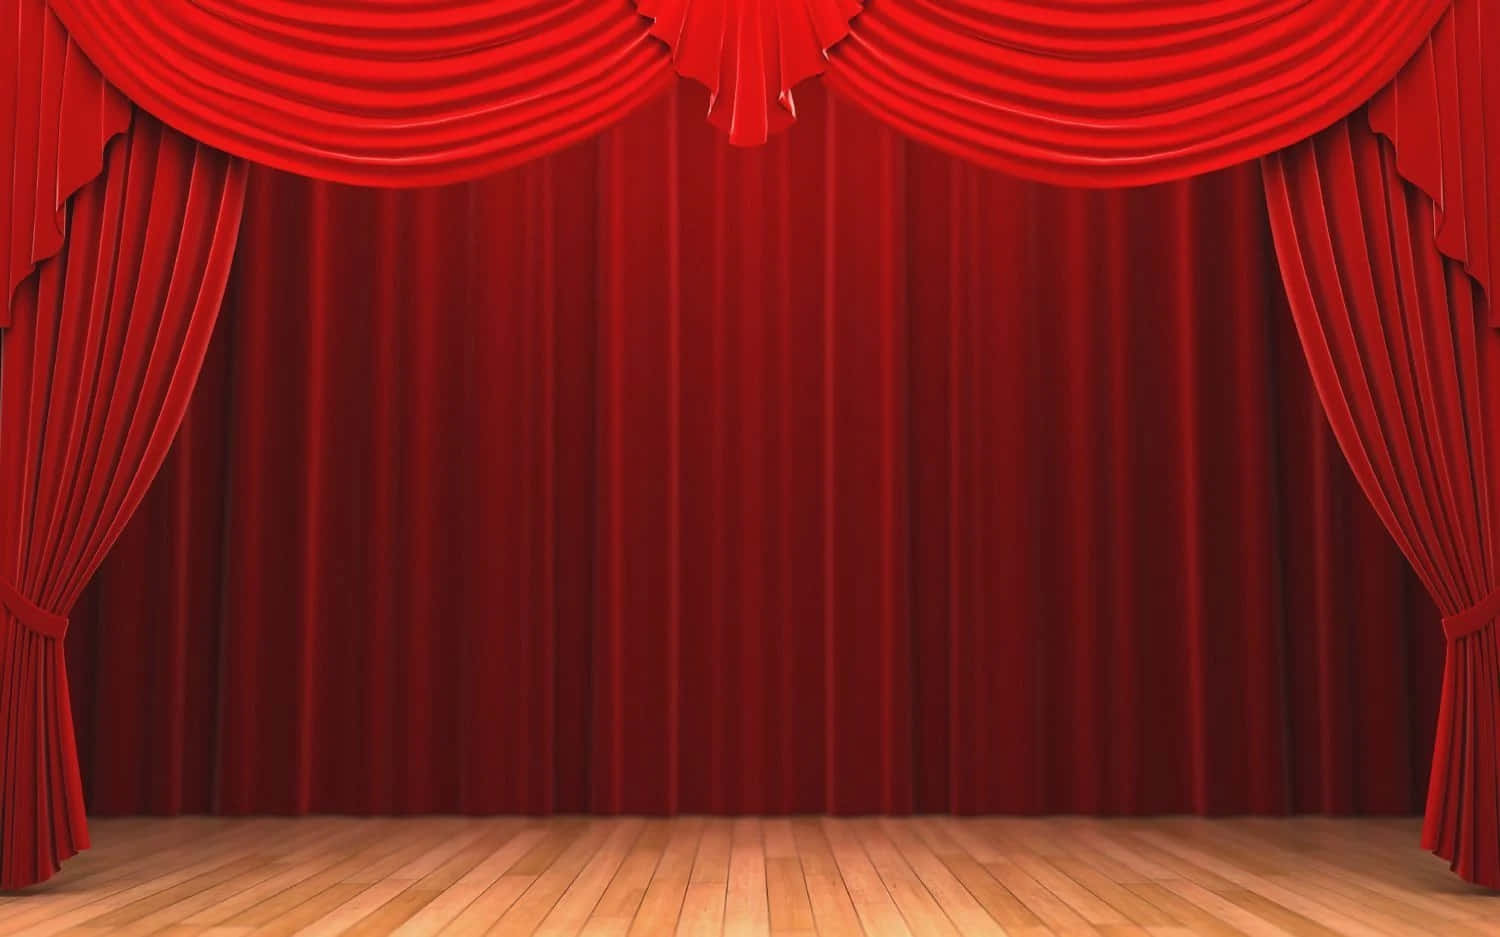 Red Curtain Stage With Wooden Floor Background